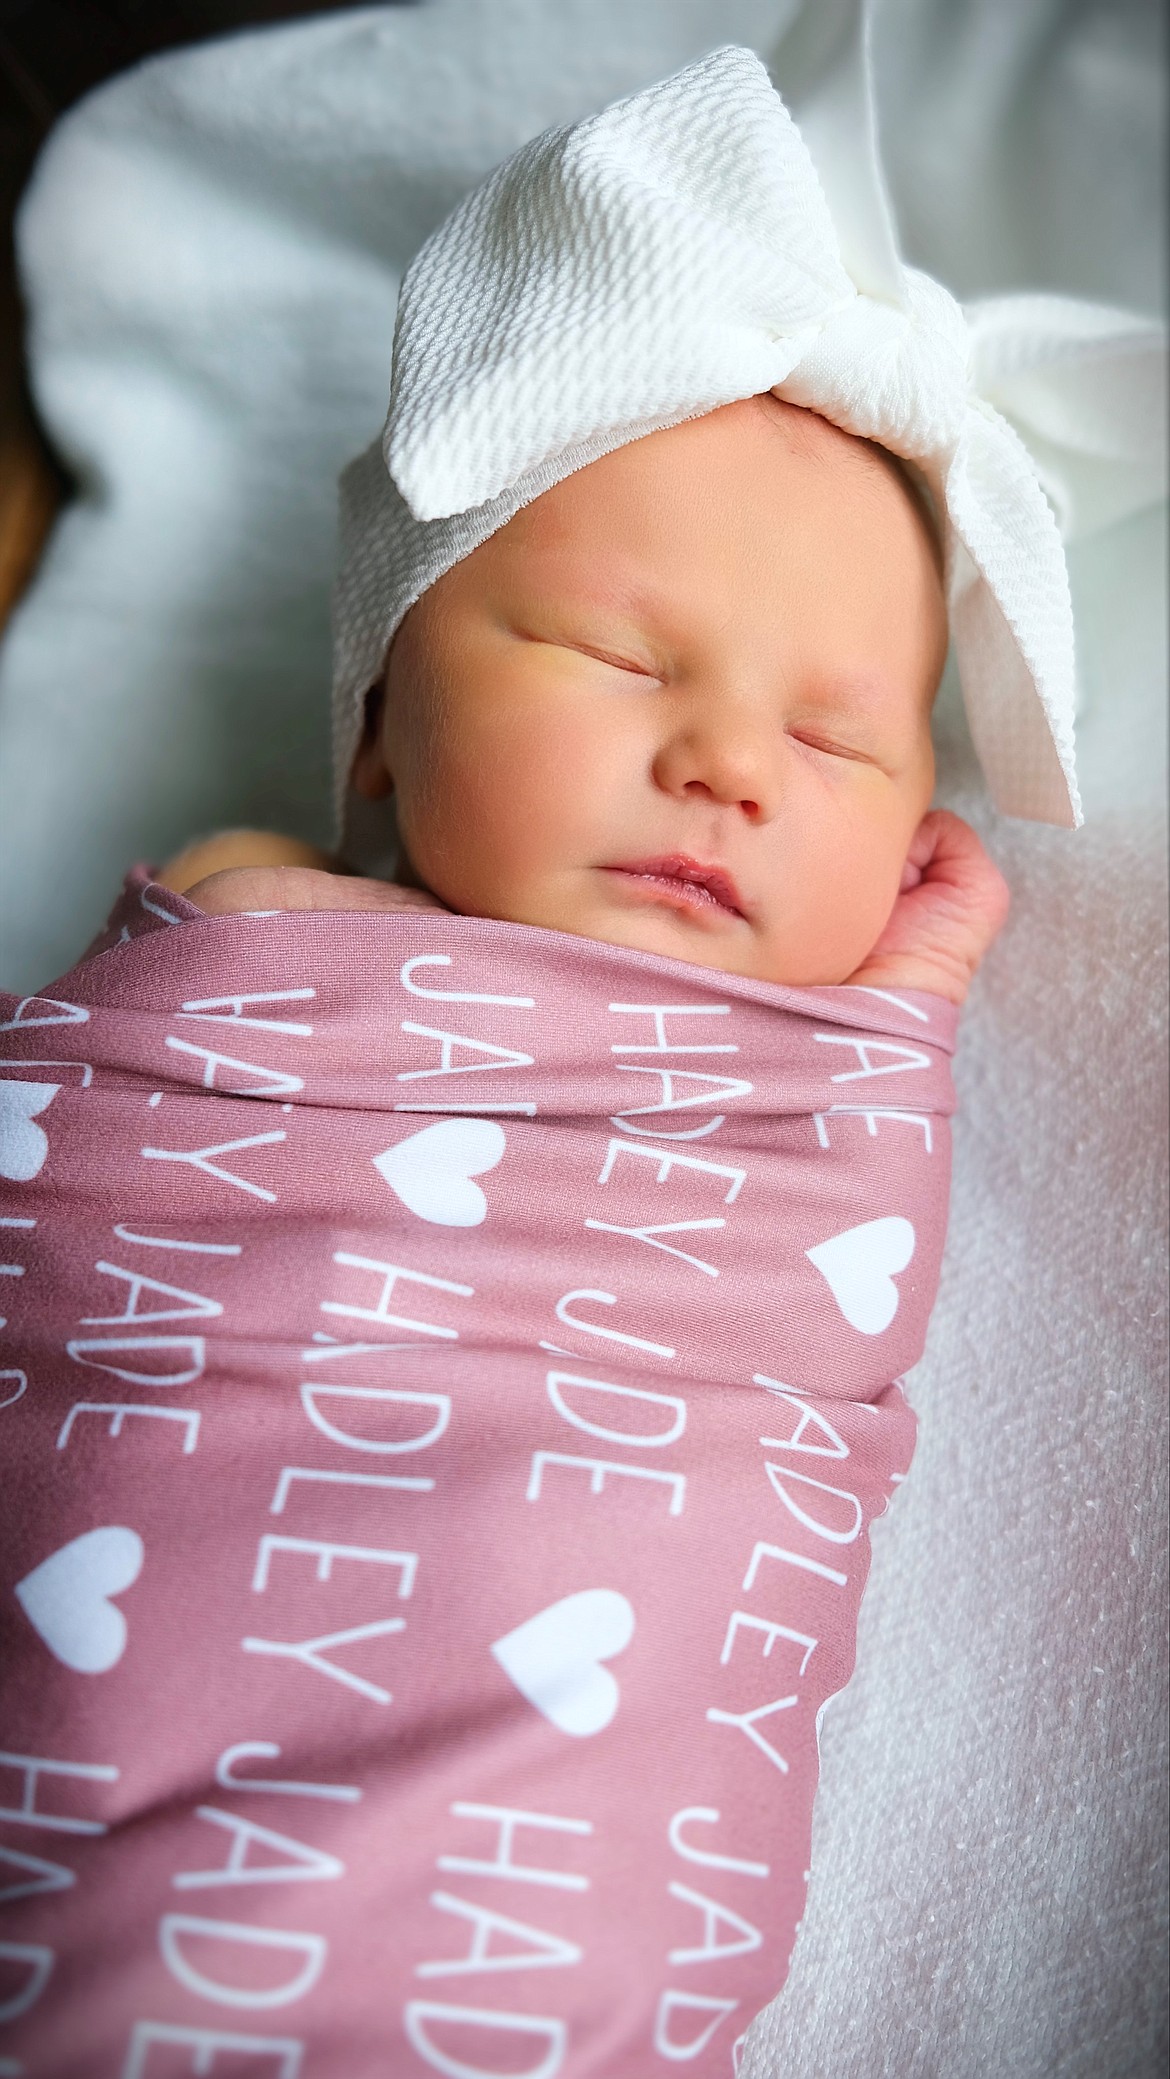 Hadley Jade Anderson was born May 4, 2022 at the St. Luke New Beginnings Birth Center. She weighed 6 pounds 10 ounces. Her parents are Matthew Anderson and Skye Chandler of Ronan. Her paternal grandfather is Dan Smith of Belgrade. Her maternal grandparents are Brent and Tye Herreid of Ronan.